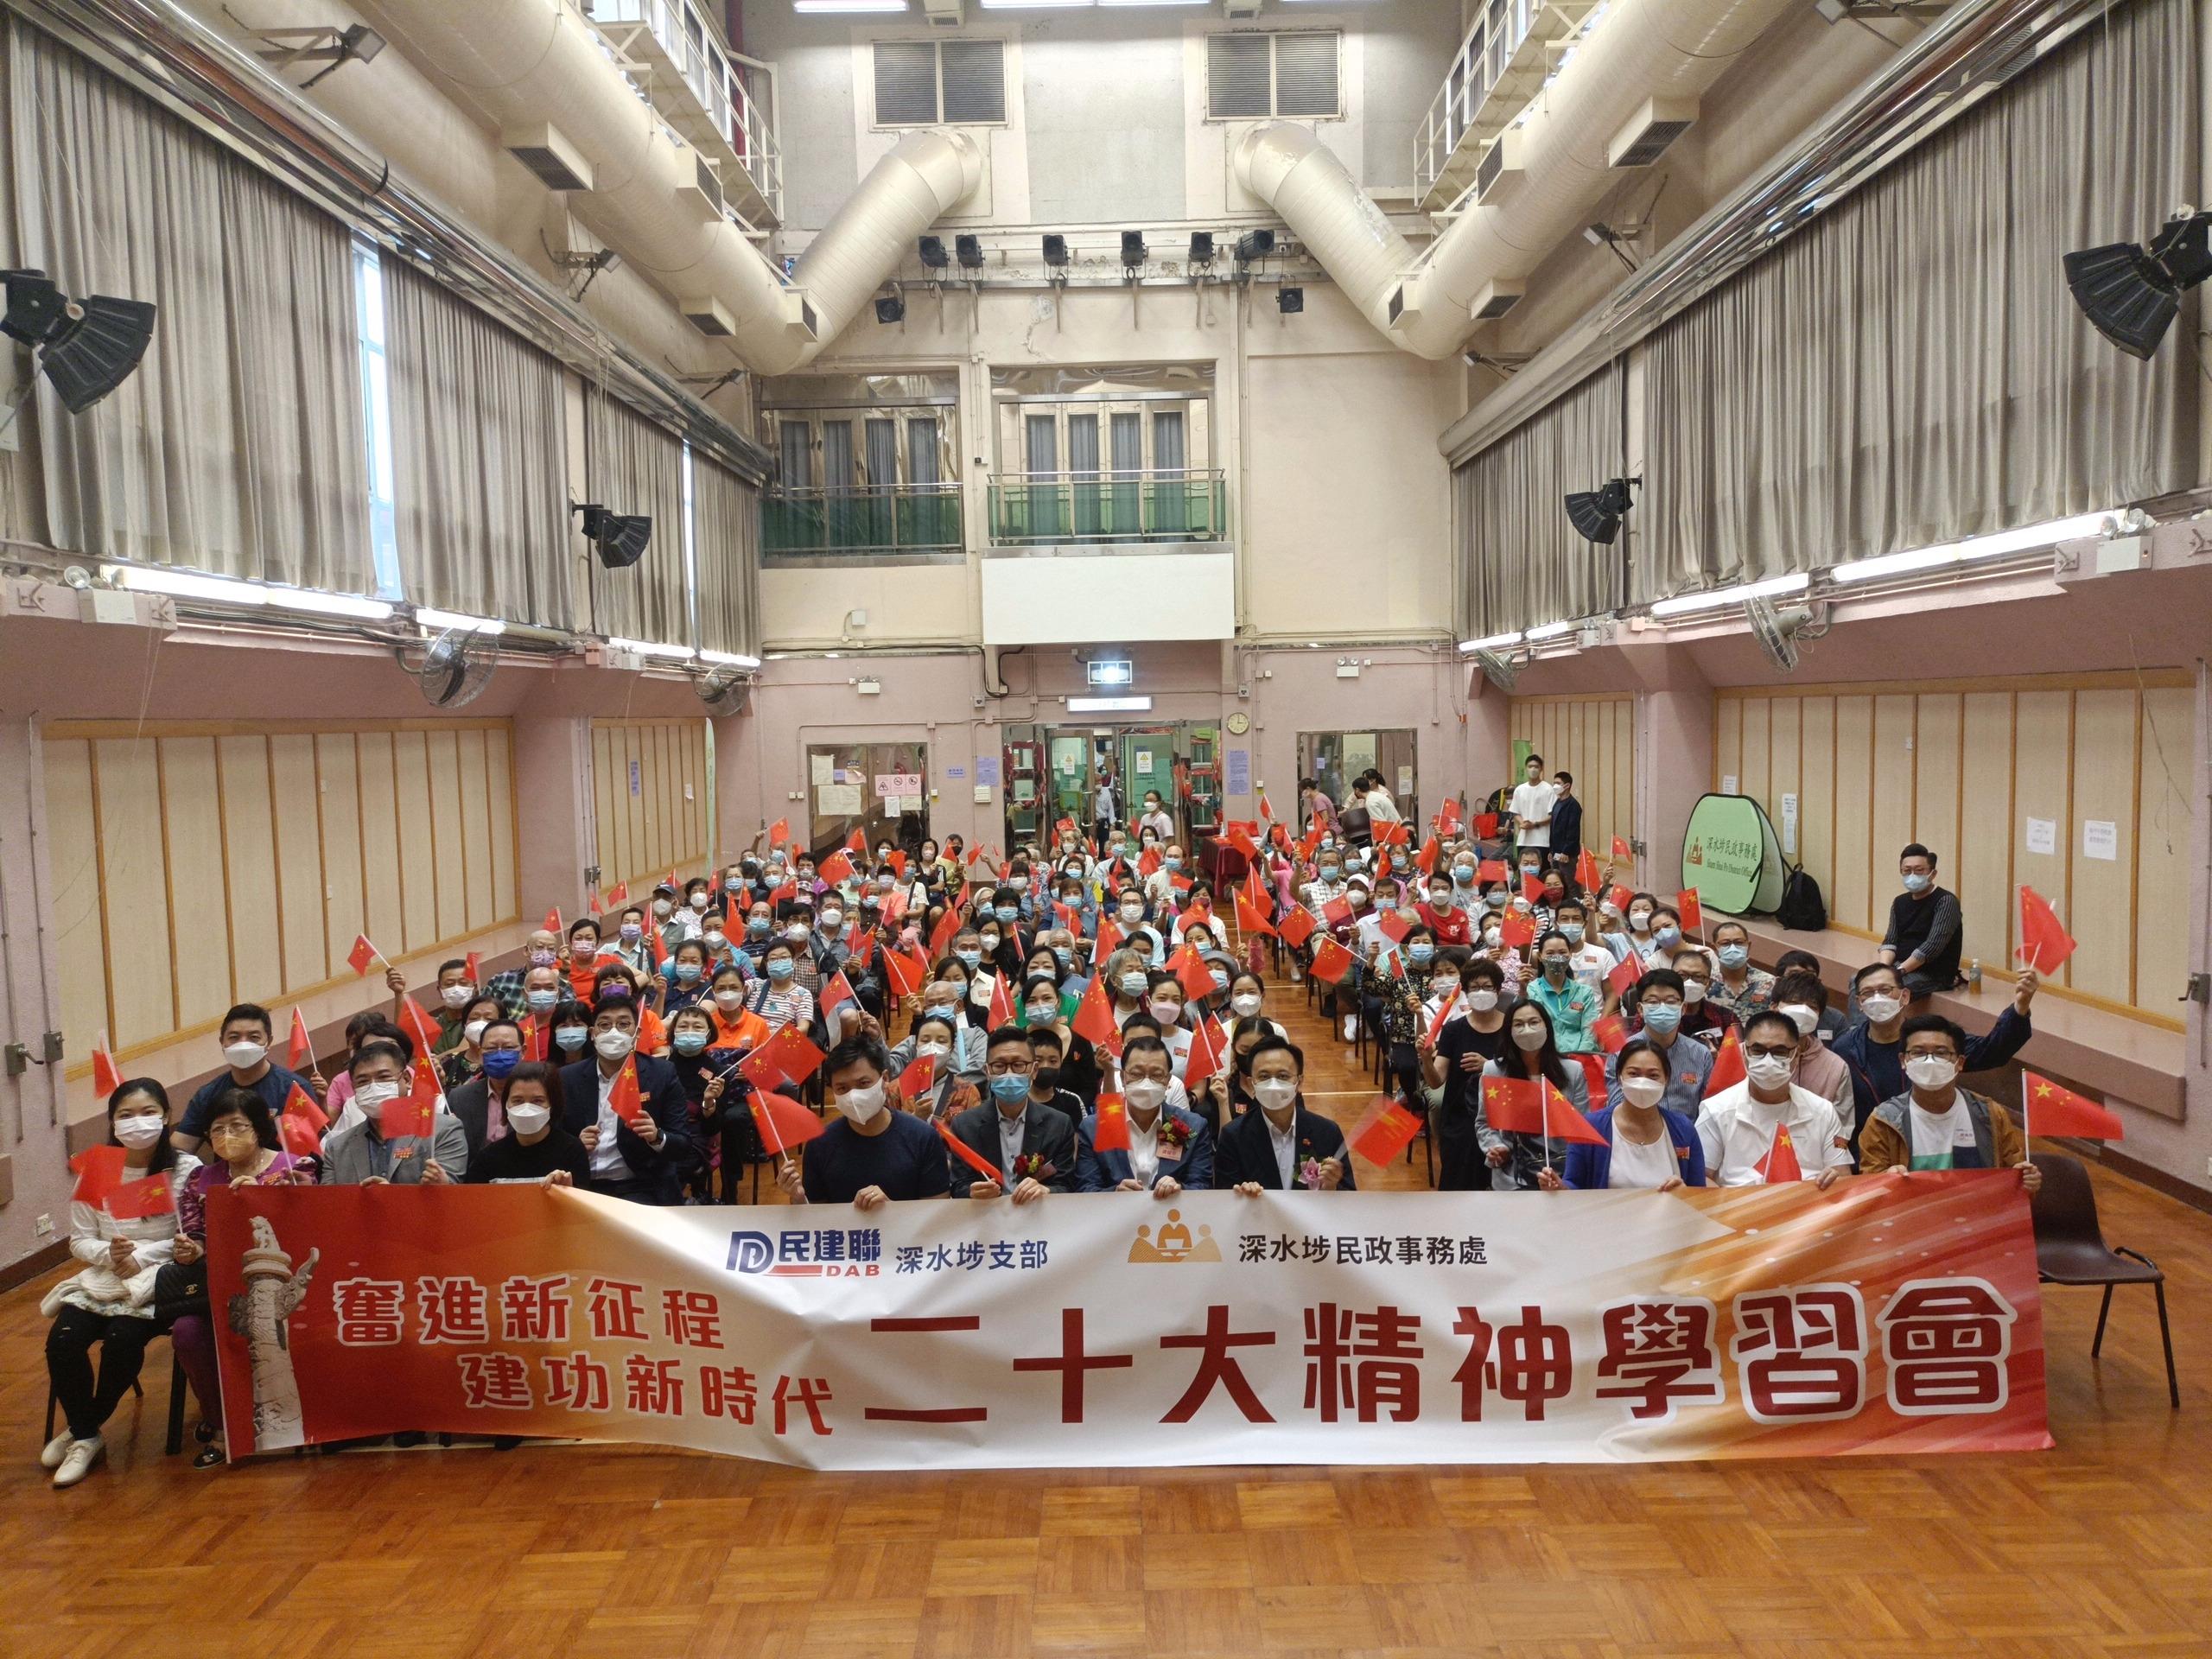 The Sham Shui Po District Office, together with the Sham Shui Po Branch of the Democratic Alliance for the Betterment and Progress of Hong Kong, held a session on "Spirit of the 20th National Congress of the CPC" at Shek Kip Mei Community Hall yesterday (November 20). Photo shows leaders of district bodies as well as local residents of Sham Shui Po at the session.